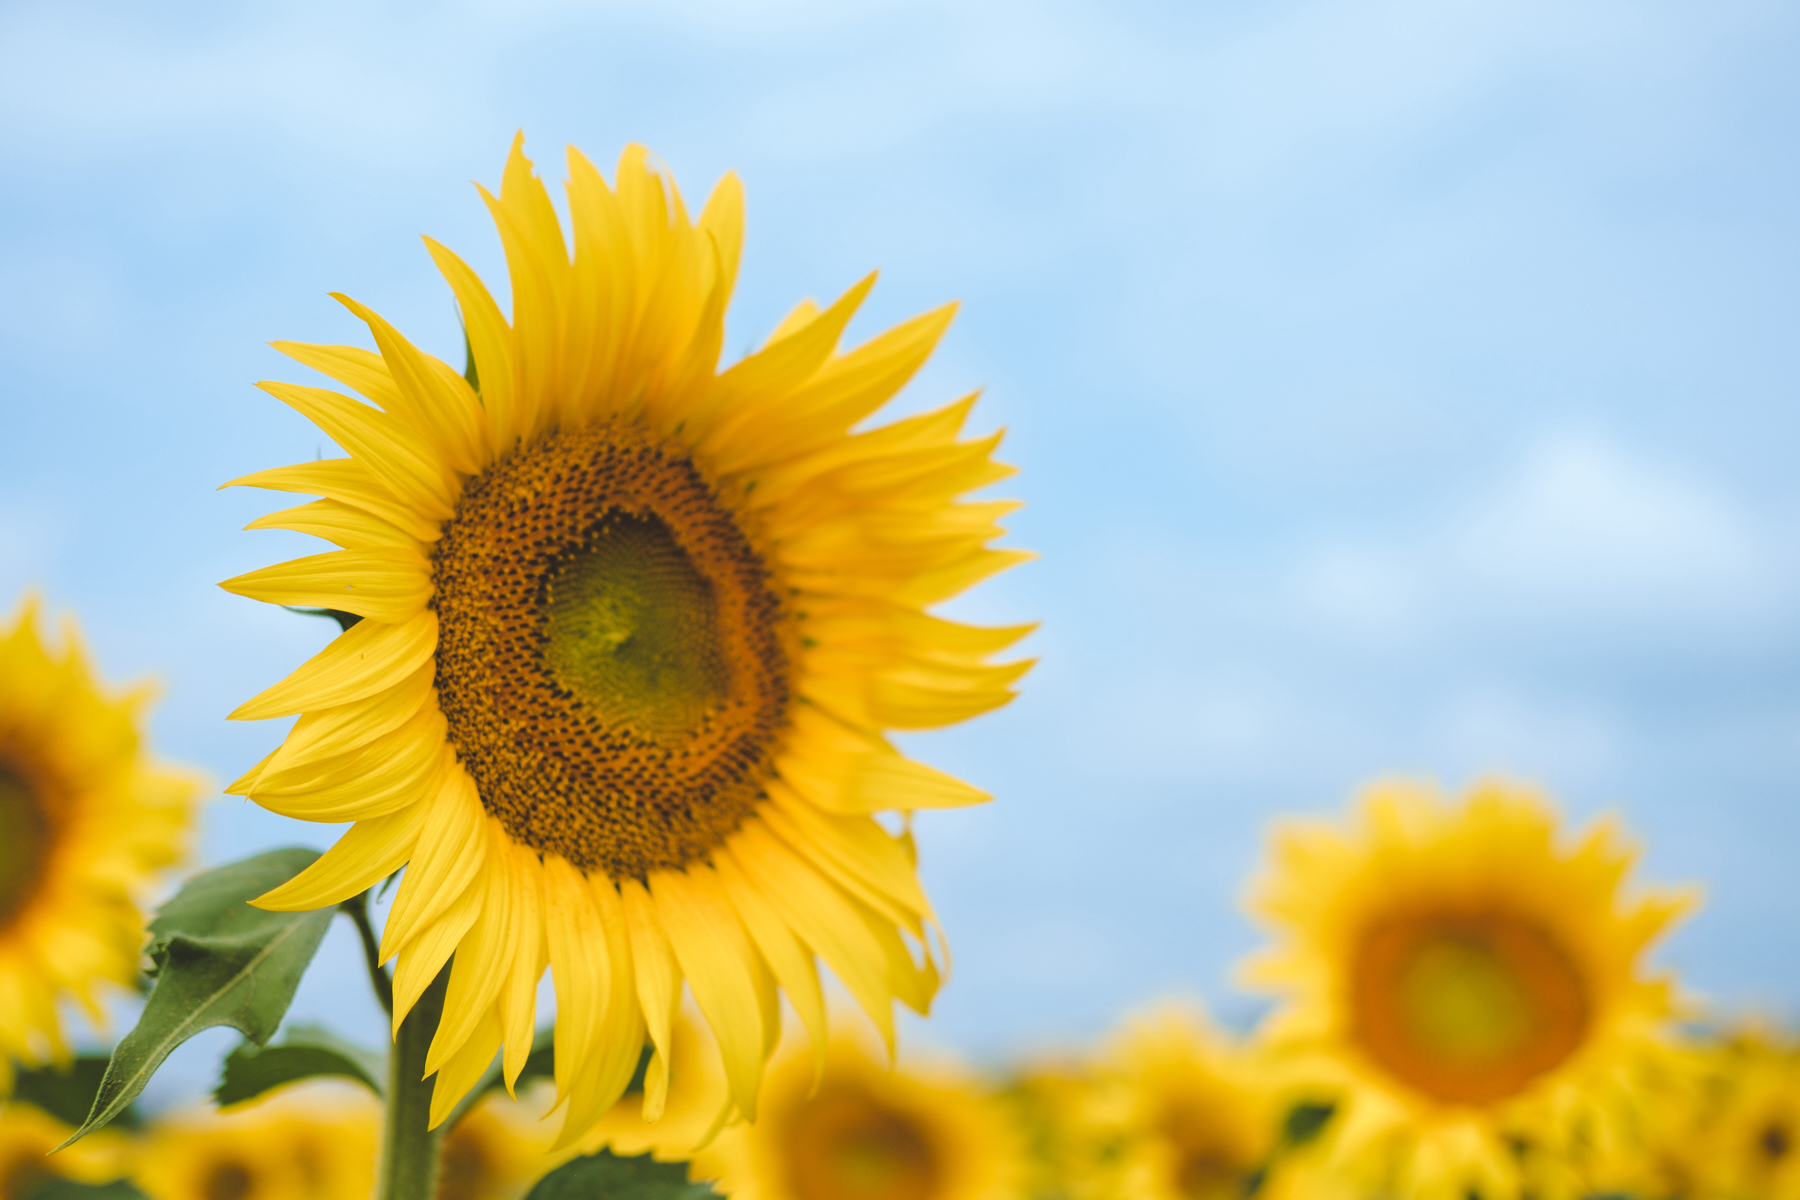 A vibrant sunflower in the foreground with more sunflowers softly blurred in the background against a clear blue sky.